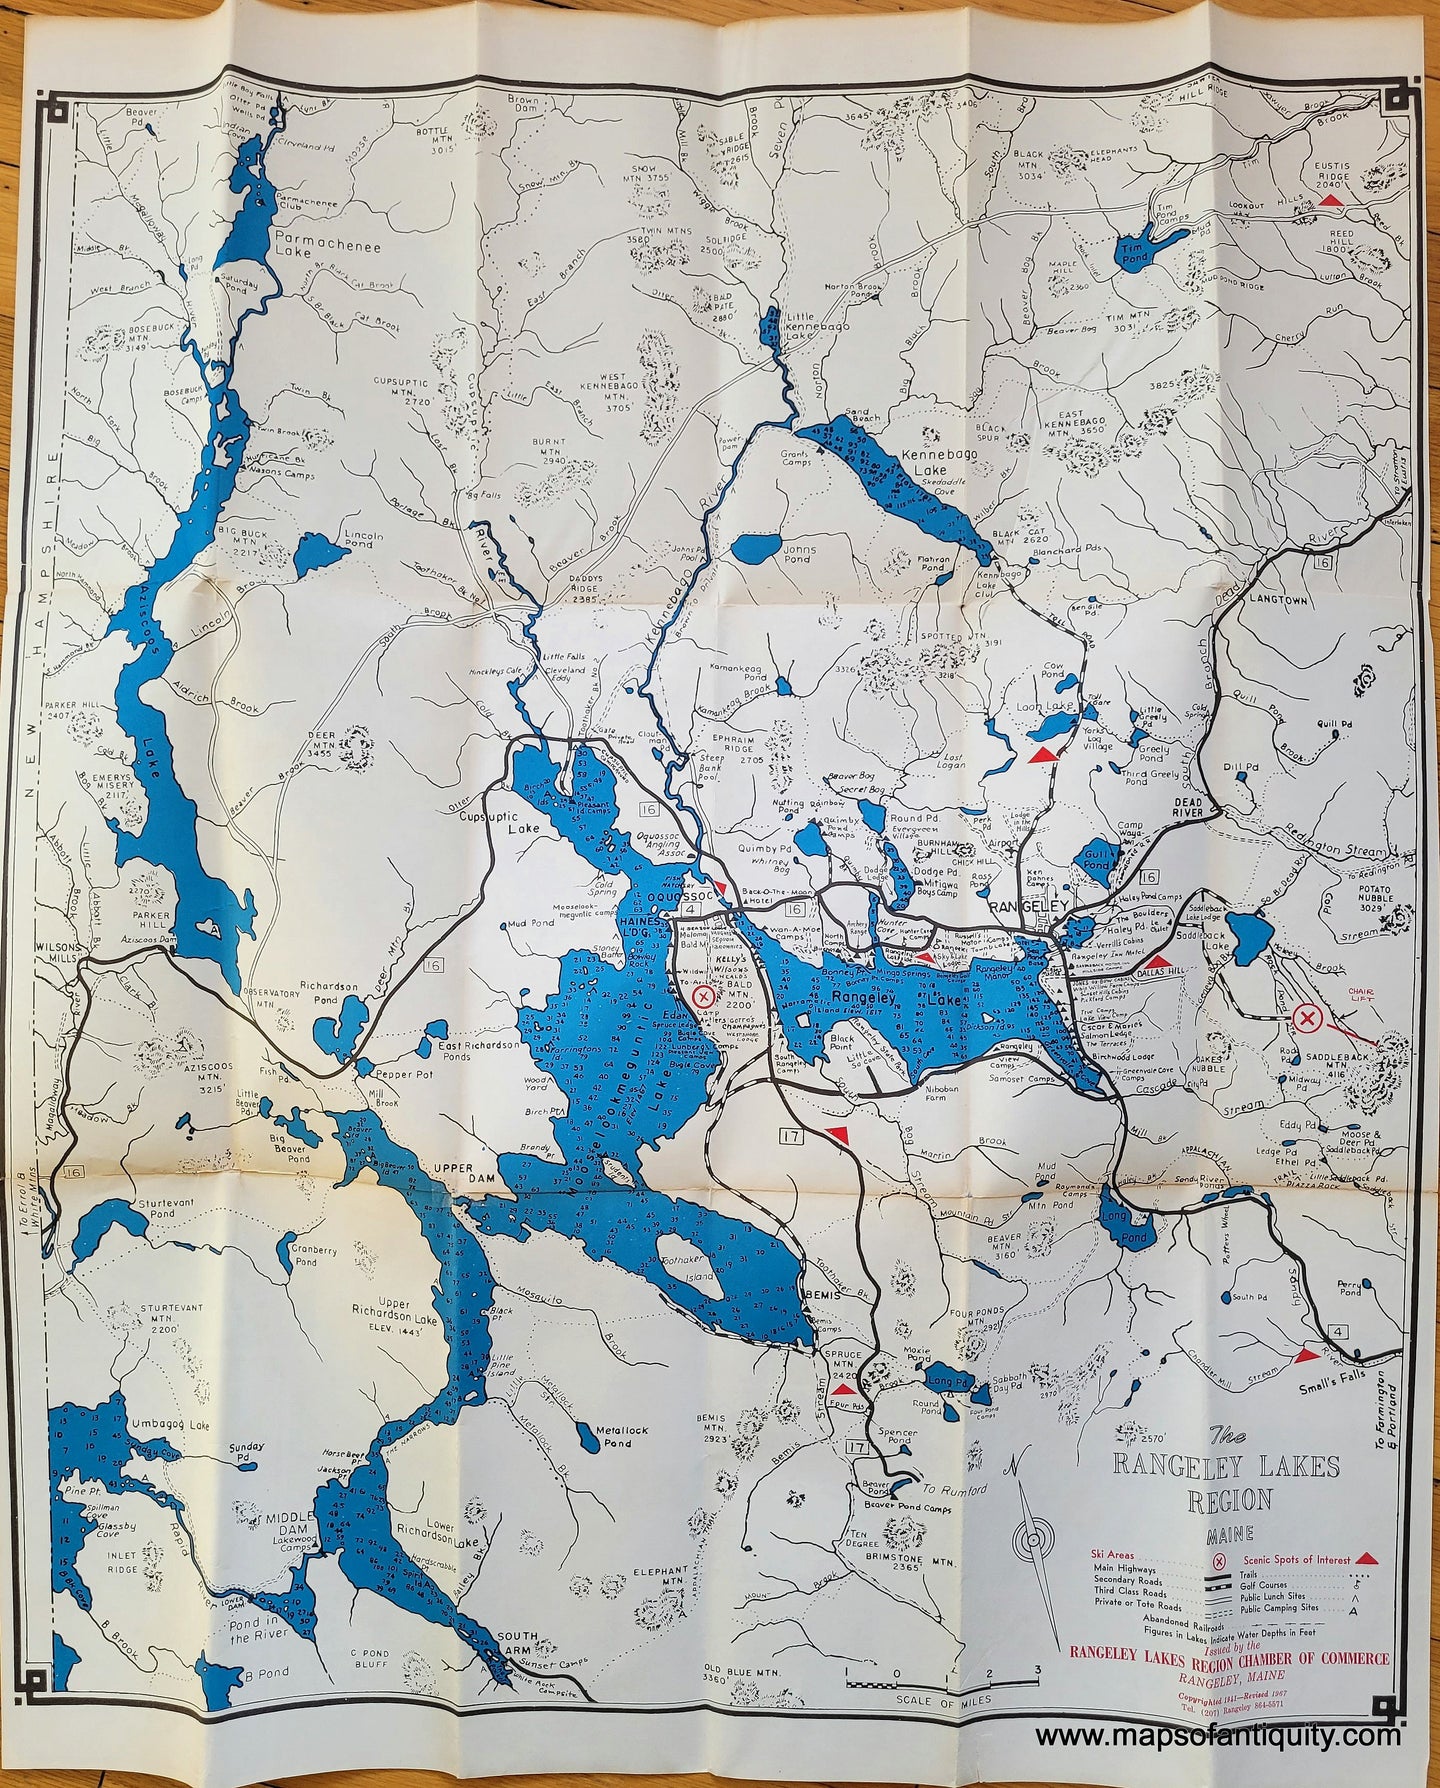 Genuine-Antique-Folding-Map-The-Rangeley-Lakes-Region-Maine--1967-Rangeley-Lakes-Region-Chamber-of-Commerce-Maps-Of-Antiquity